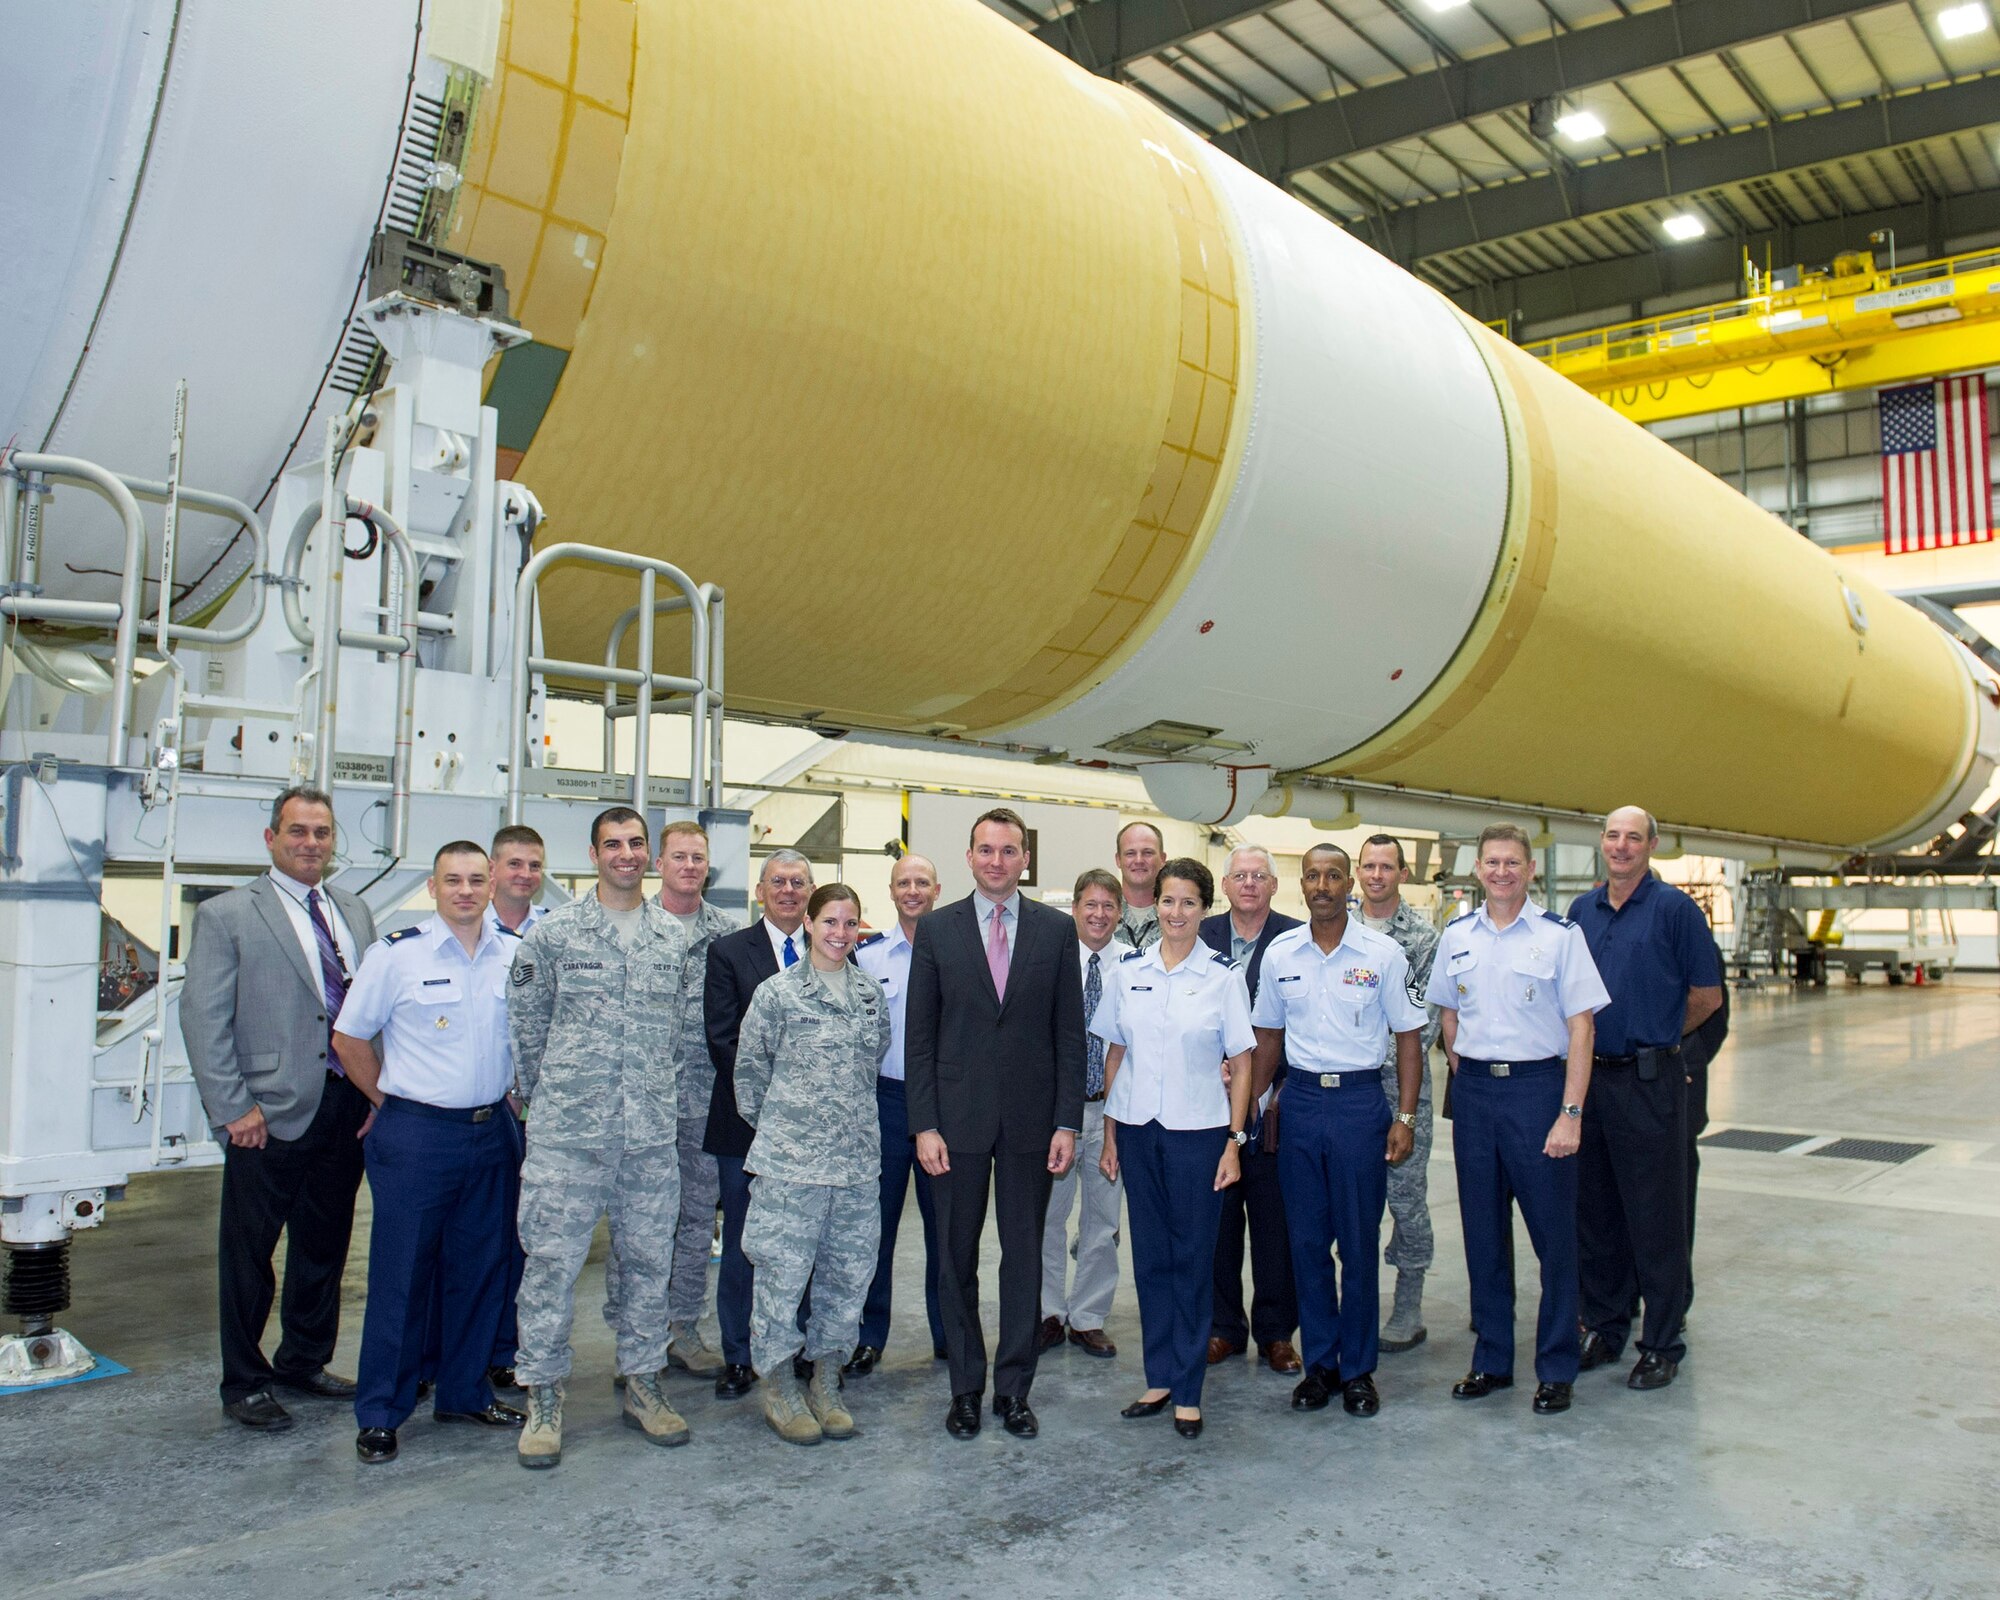 Acting Secretary of the Air Force Eric Fanning poses with Brig. Gen. Nina Armagno (right), 45th Space Wing commander, in front of a Delta IV launch vehicle during his tour of the Horizontal Integration Facility at Cape Canaveral Air Force Station Aug. 8, 2013, given by 1st Lt. Danielle DePaolis, 5th Space Launch Squadron engineer (left of Fanning). (U.S. Air Force photo/Matthew Jurgens)